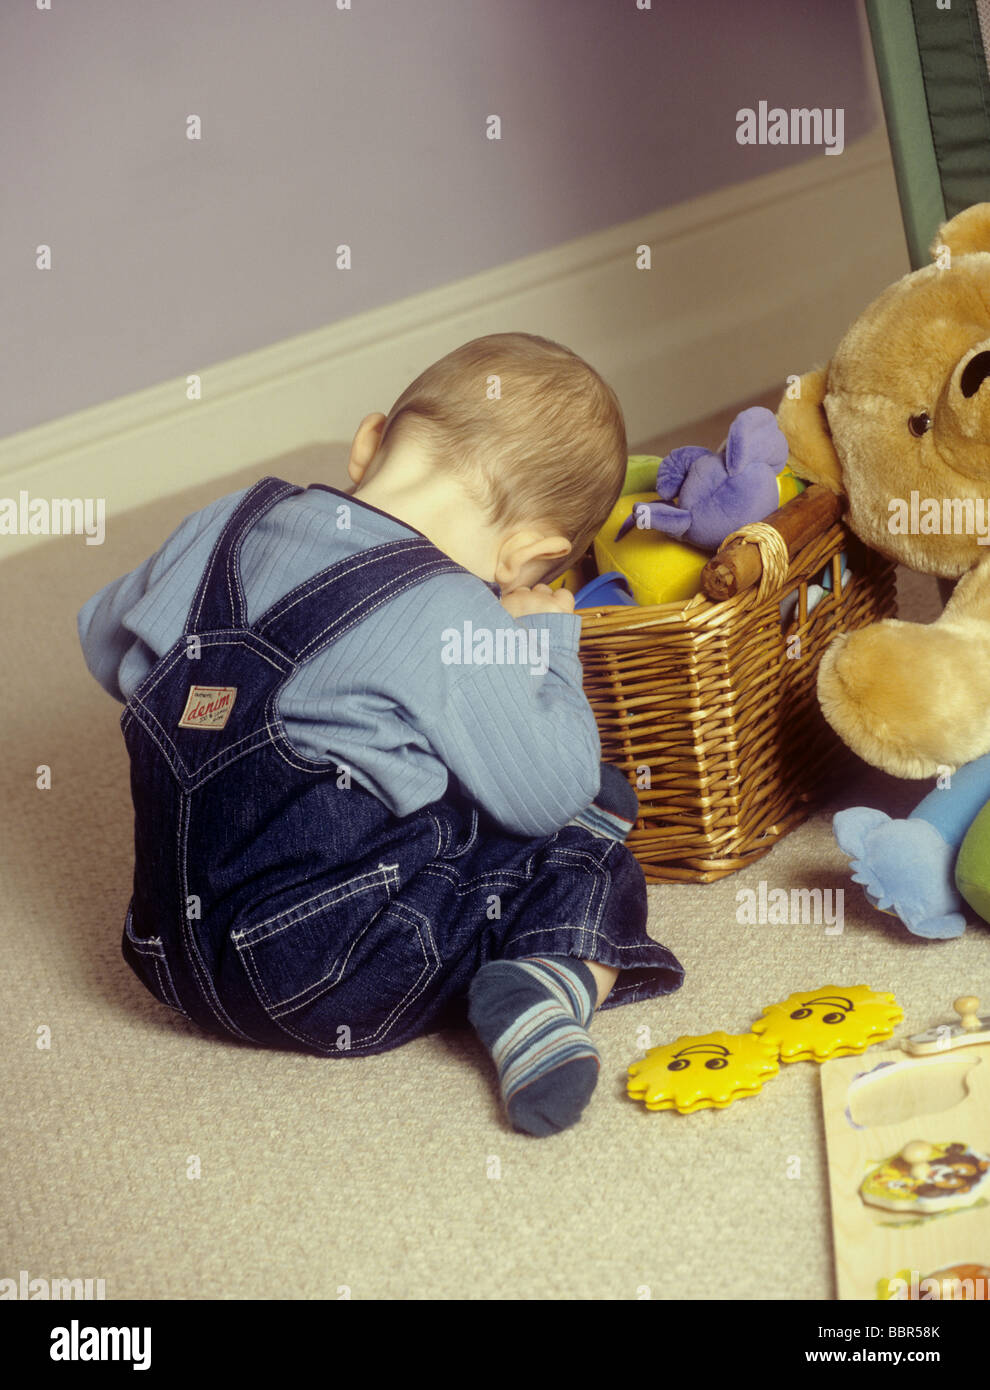 Baby boy with toys resting his head on his hands, tired, unhappy, neglect, England, U.K. UK Stock Photo